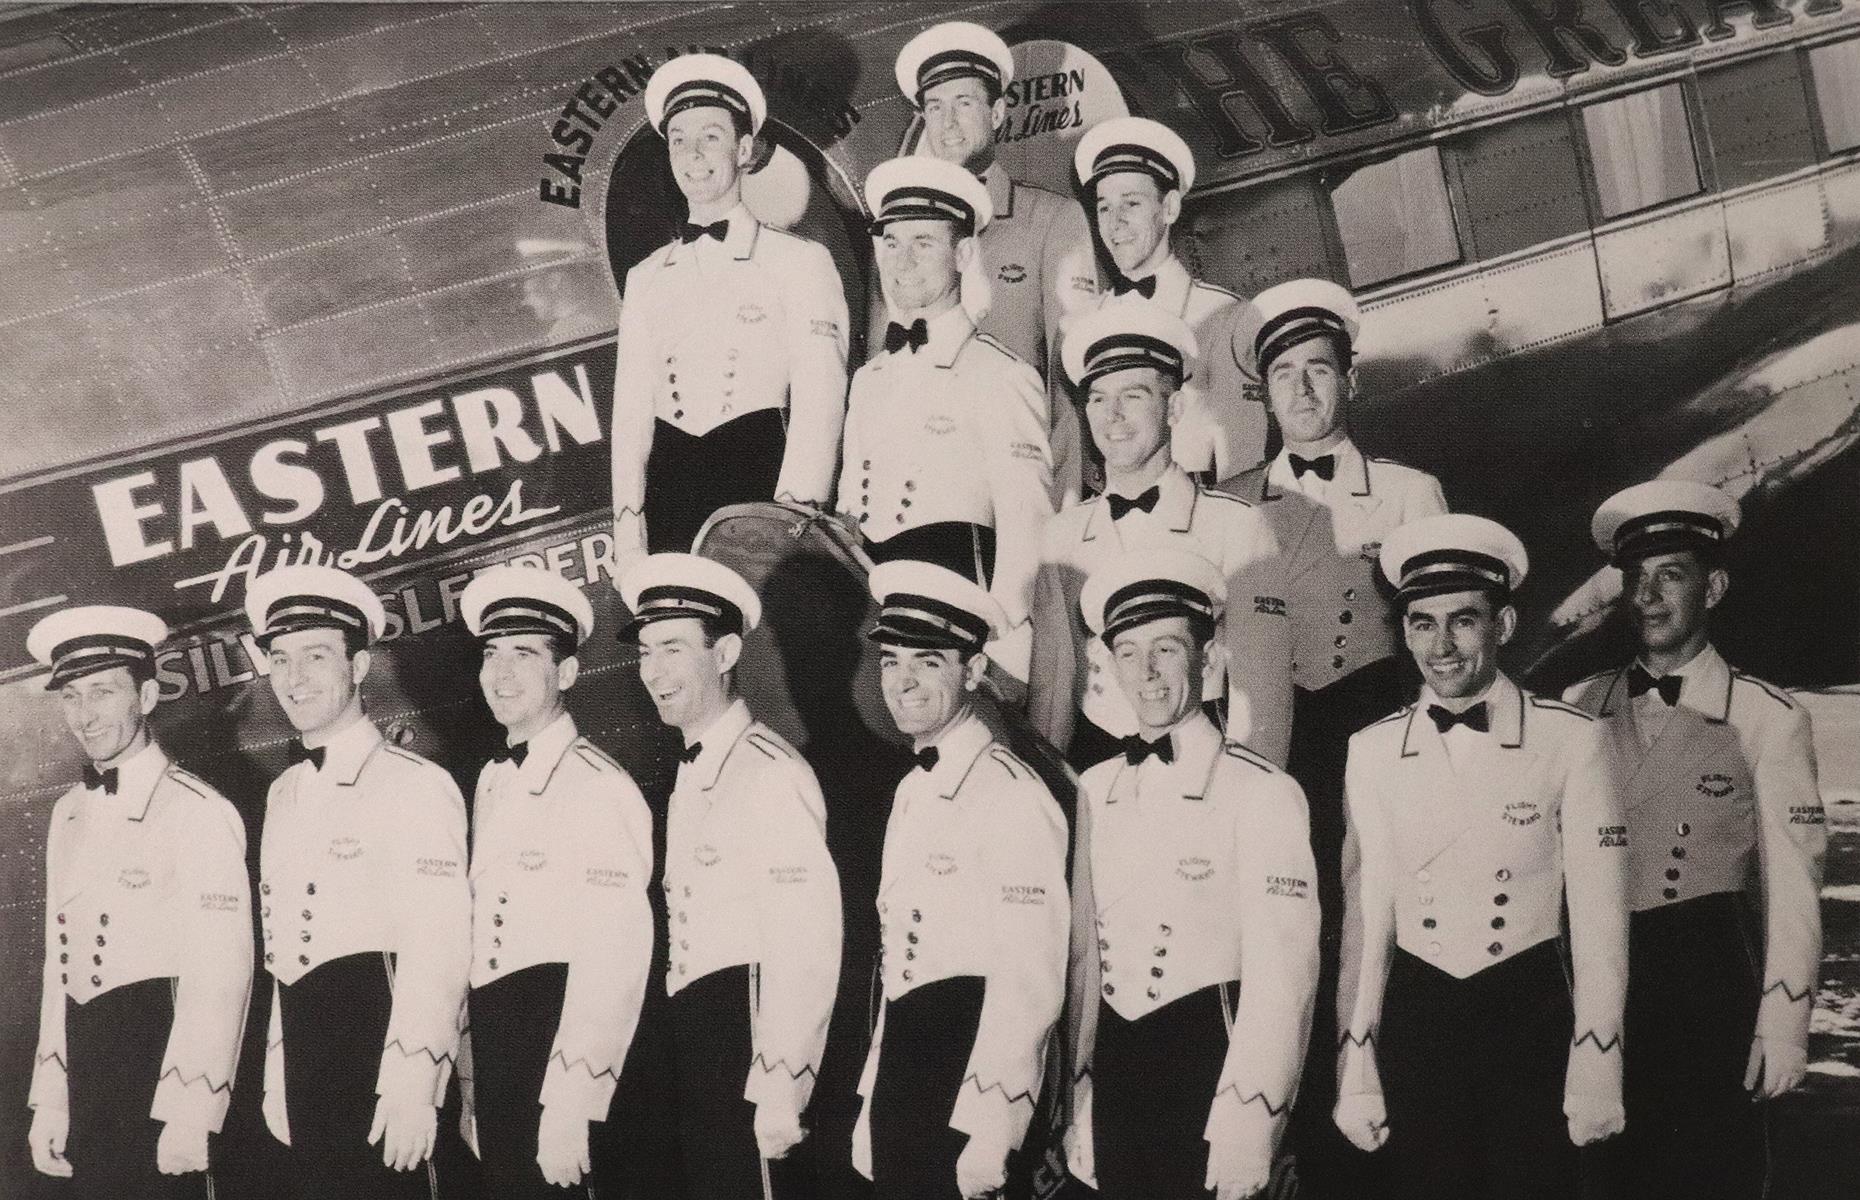 Slide 10 of 51: In the 1920s and into early 1930s, the role of flight attendant was one mostly reserved for men, who were usually referred to as "cabin boys". This was soon flipped on its head, though. The first female flight attendant, a nurse named Ellen Church, was employed in 1930 and by the middle of the decade most of these jobs went to women. The women were often also trained nurses and there were strict rules as to their age, height and weight. Before this change, this photo shows an all-male team of air stewards posing before an Eastern Air Lines plane in the early 1930s.